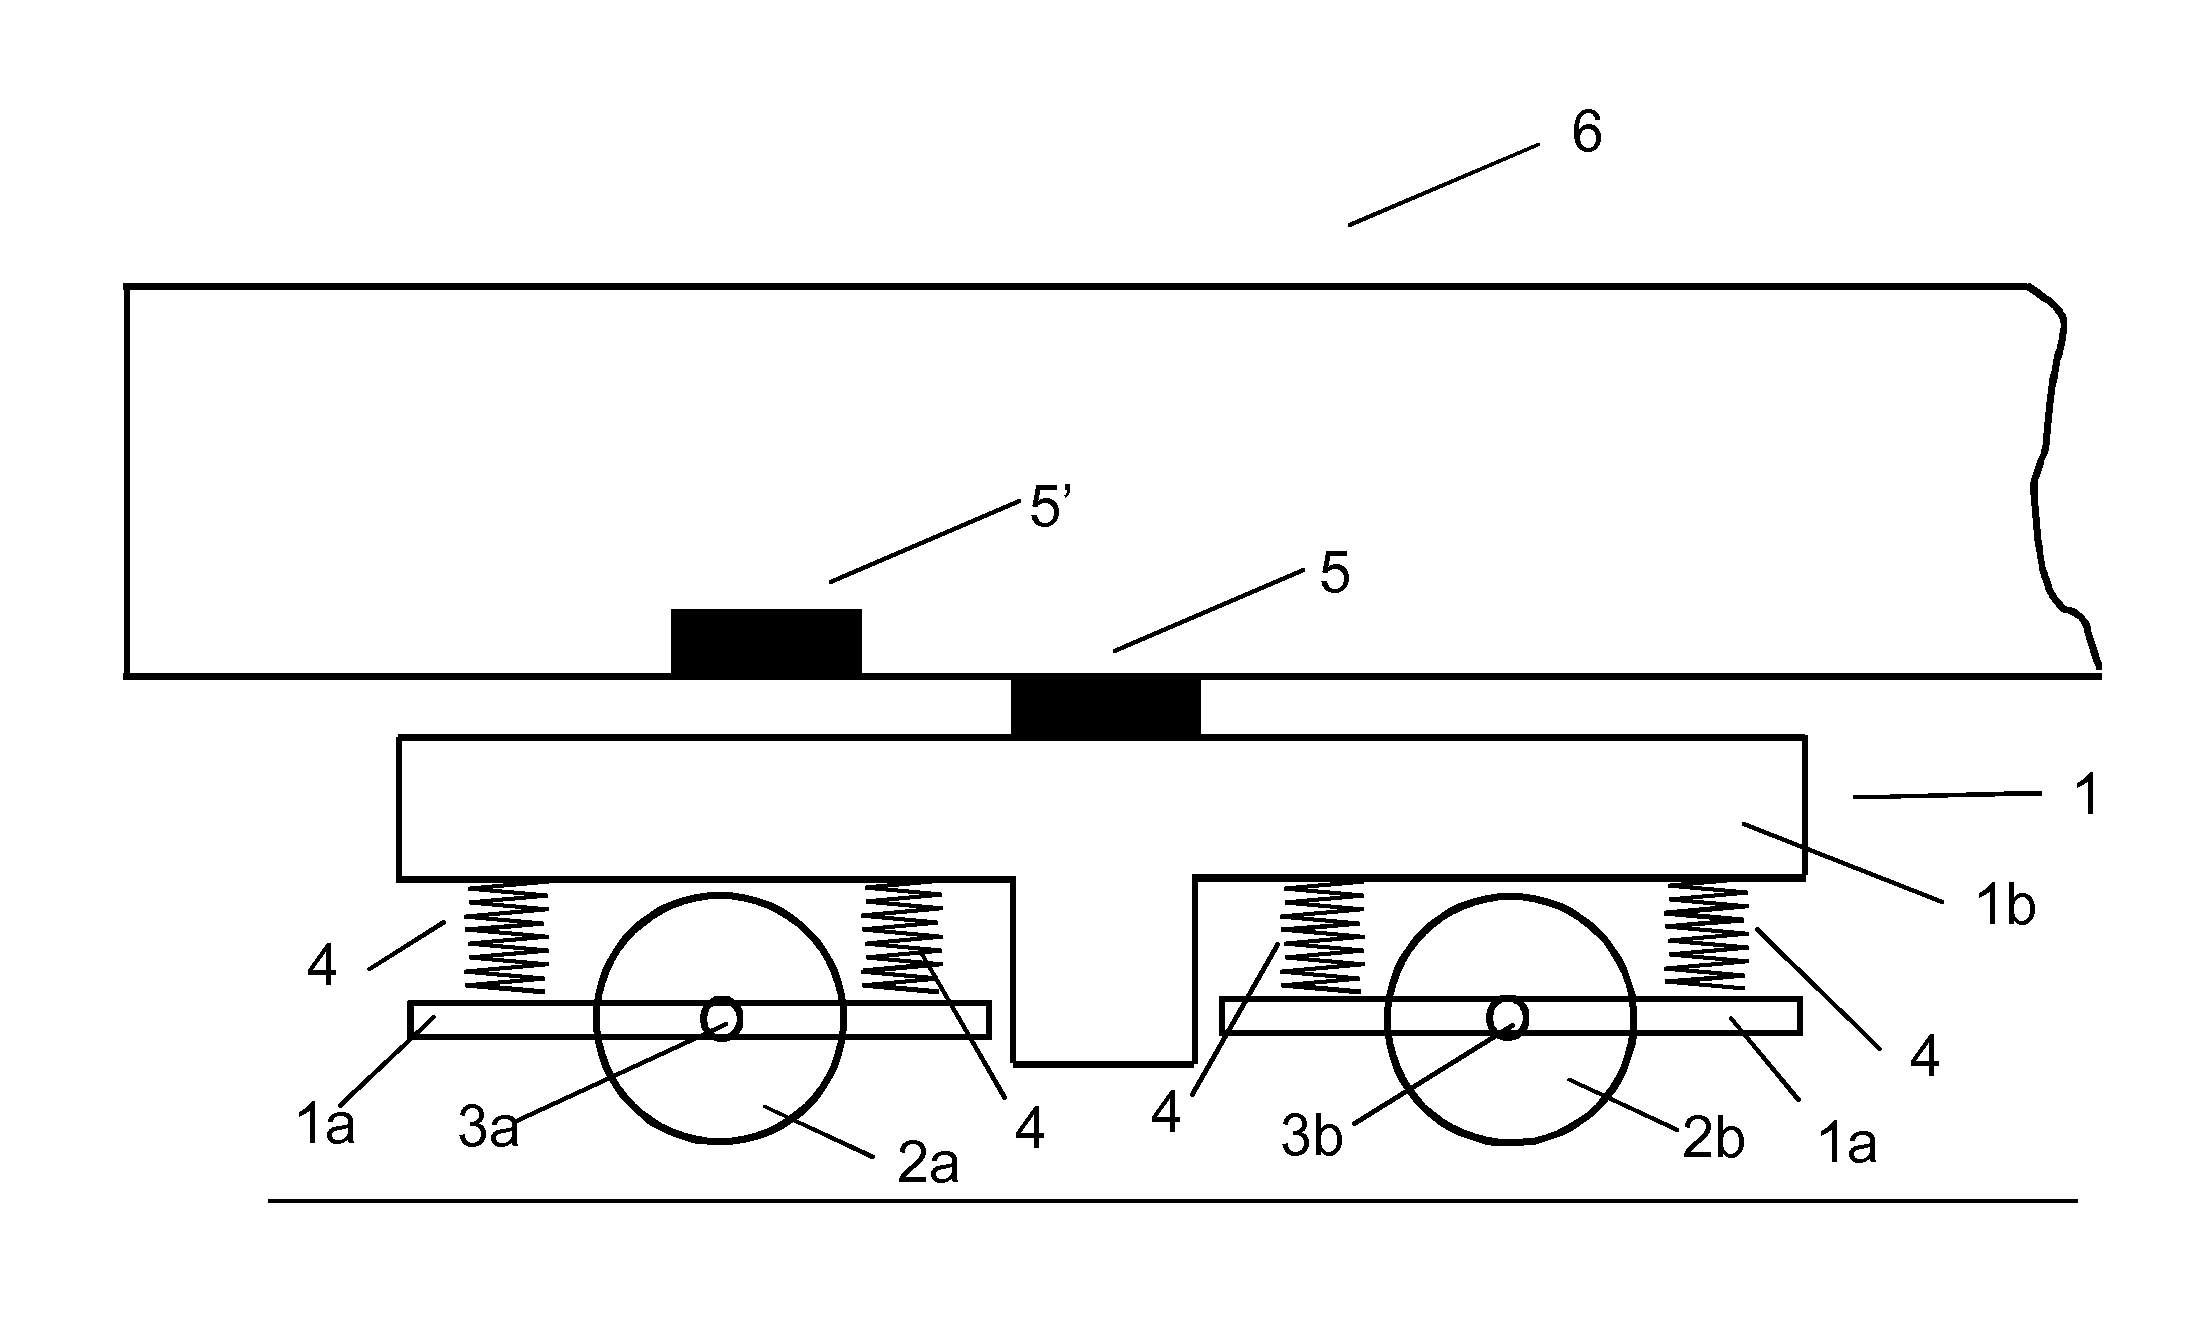 Method and system for detection and analysis of railway bogie operational problems